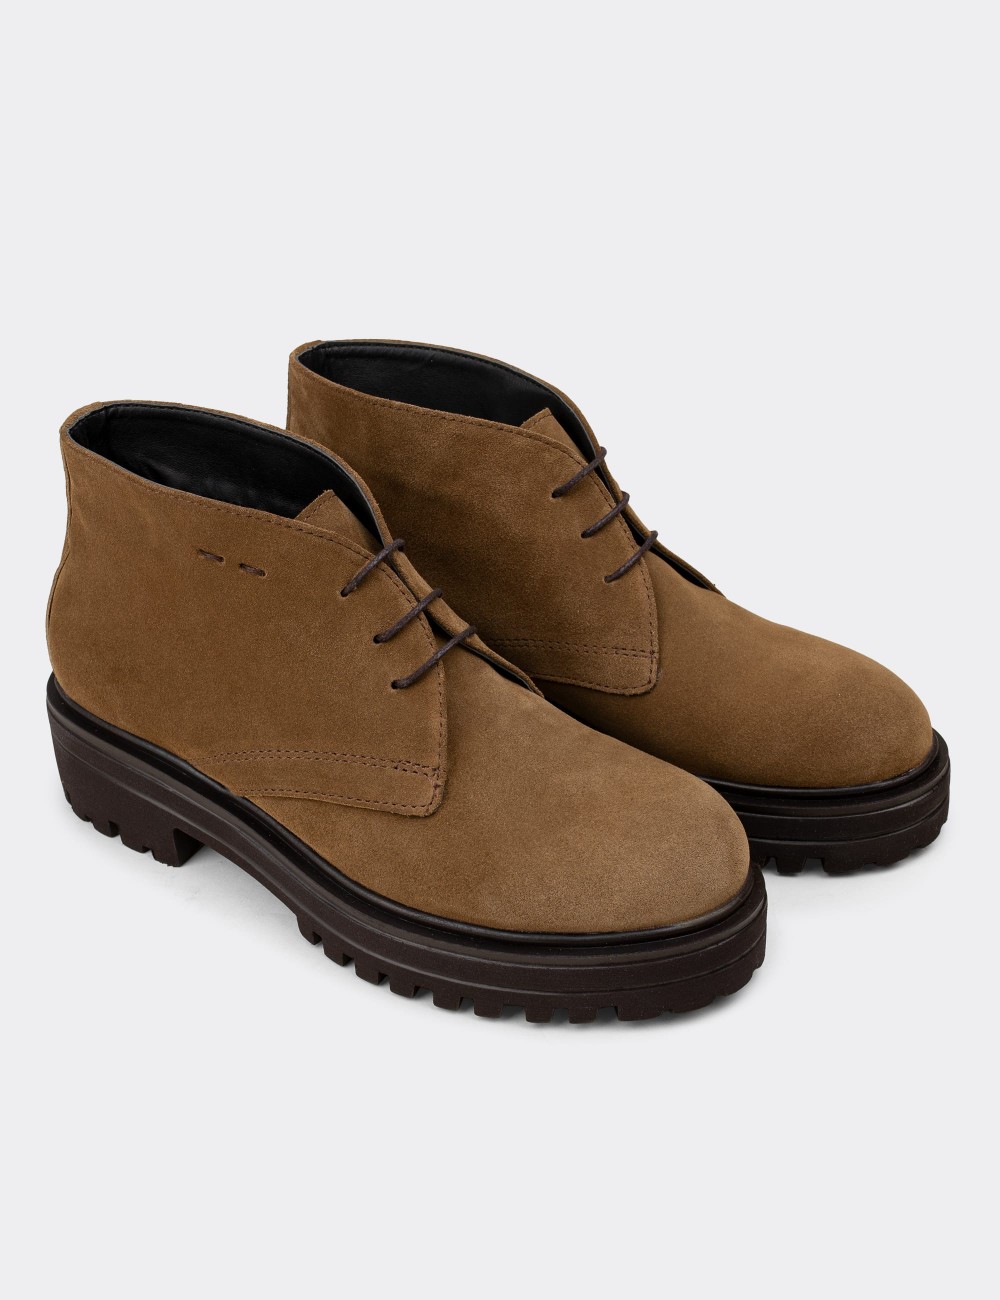 Tan Suede Leather Desert Boots - 01847ZTBAE02